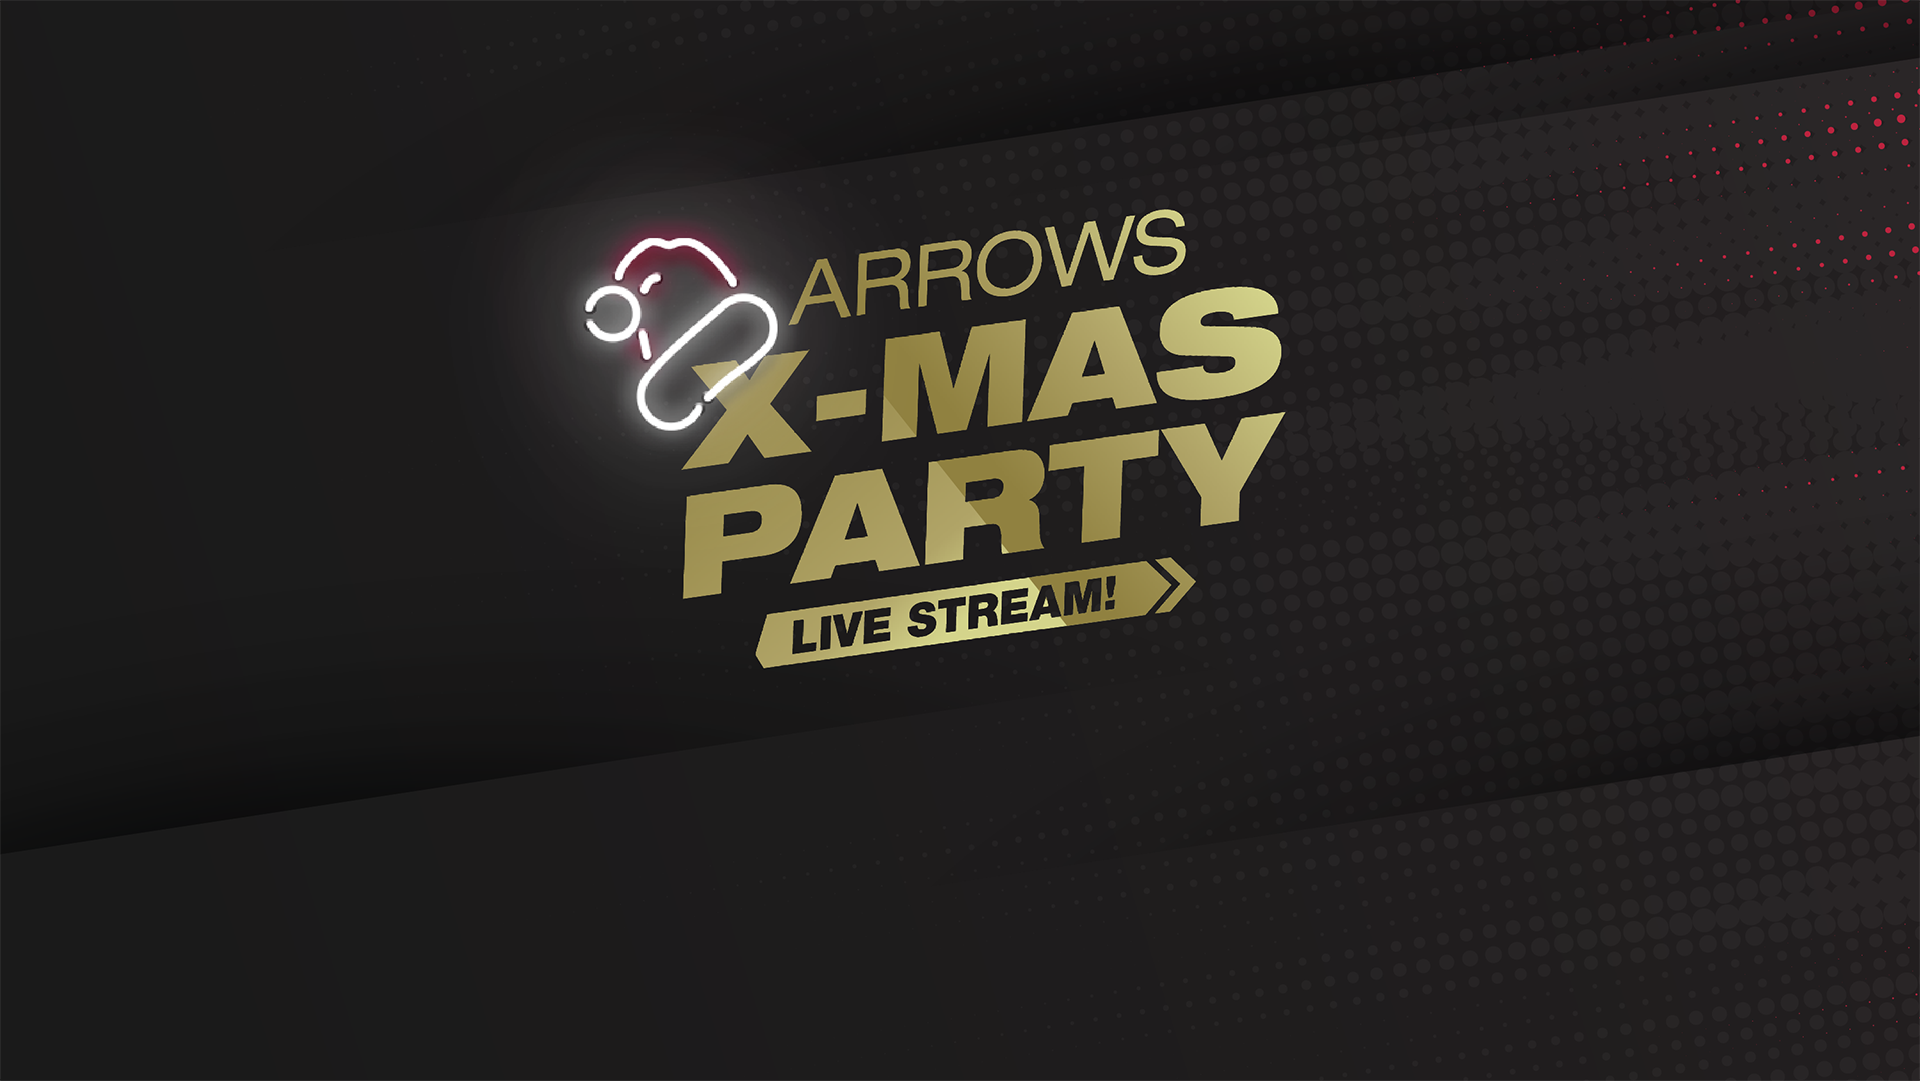 Join Us for the Arrows 2020 Christmas Party Live Stream Extravaganza